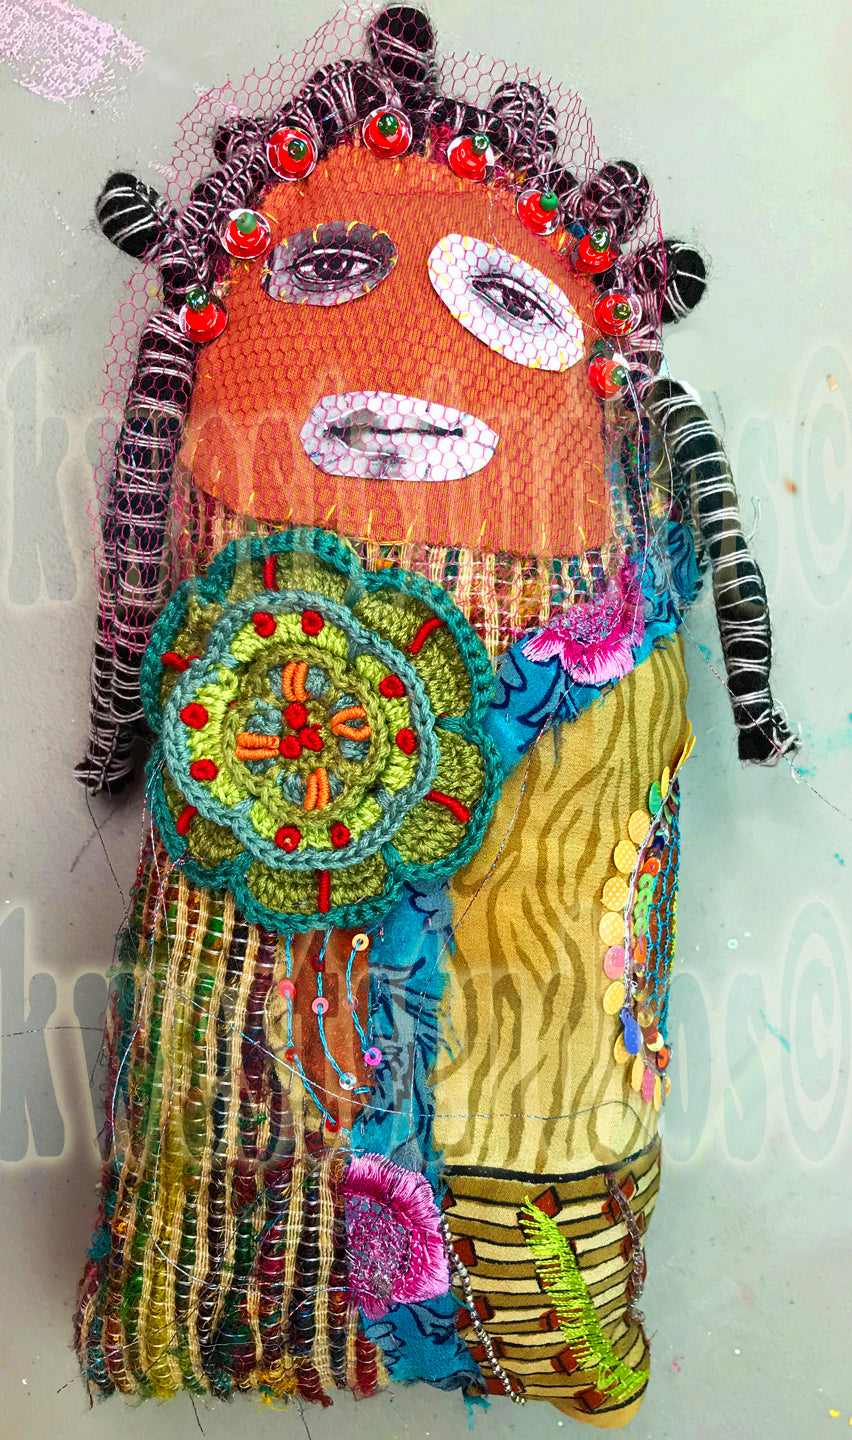 One of a kind Artist Fabric Doll hand-dyed fabric Embroidered CROCHET Flower Silks Beads Collage